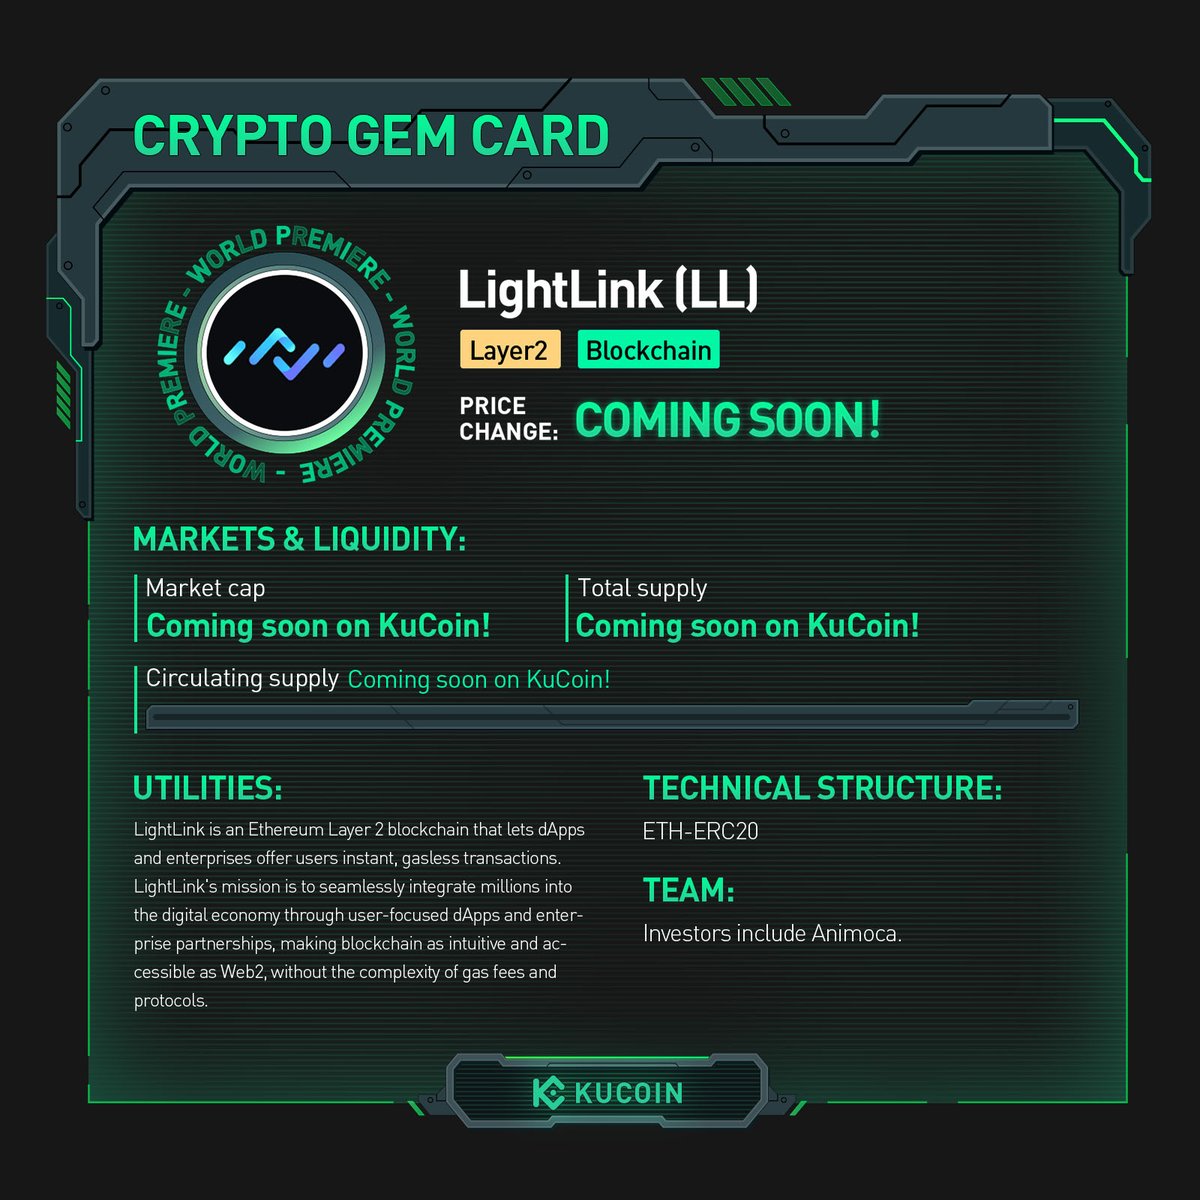 $LL trading is now live on #KuCoin!

🚀LL/USDT: trade.kucoin.com/LL-USDT?utm_so… 

Find out more about LightLink in #KuCoinCryptoGem card.

#Layer2 #Blockchain